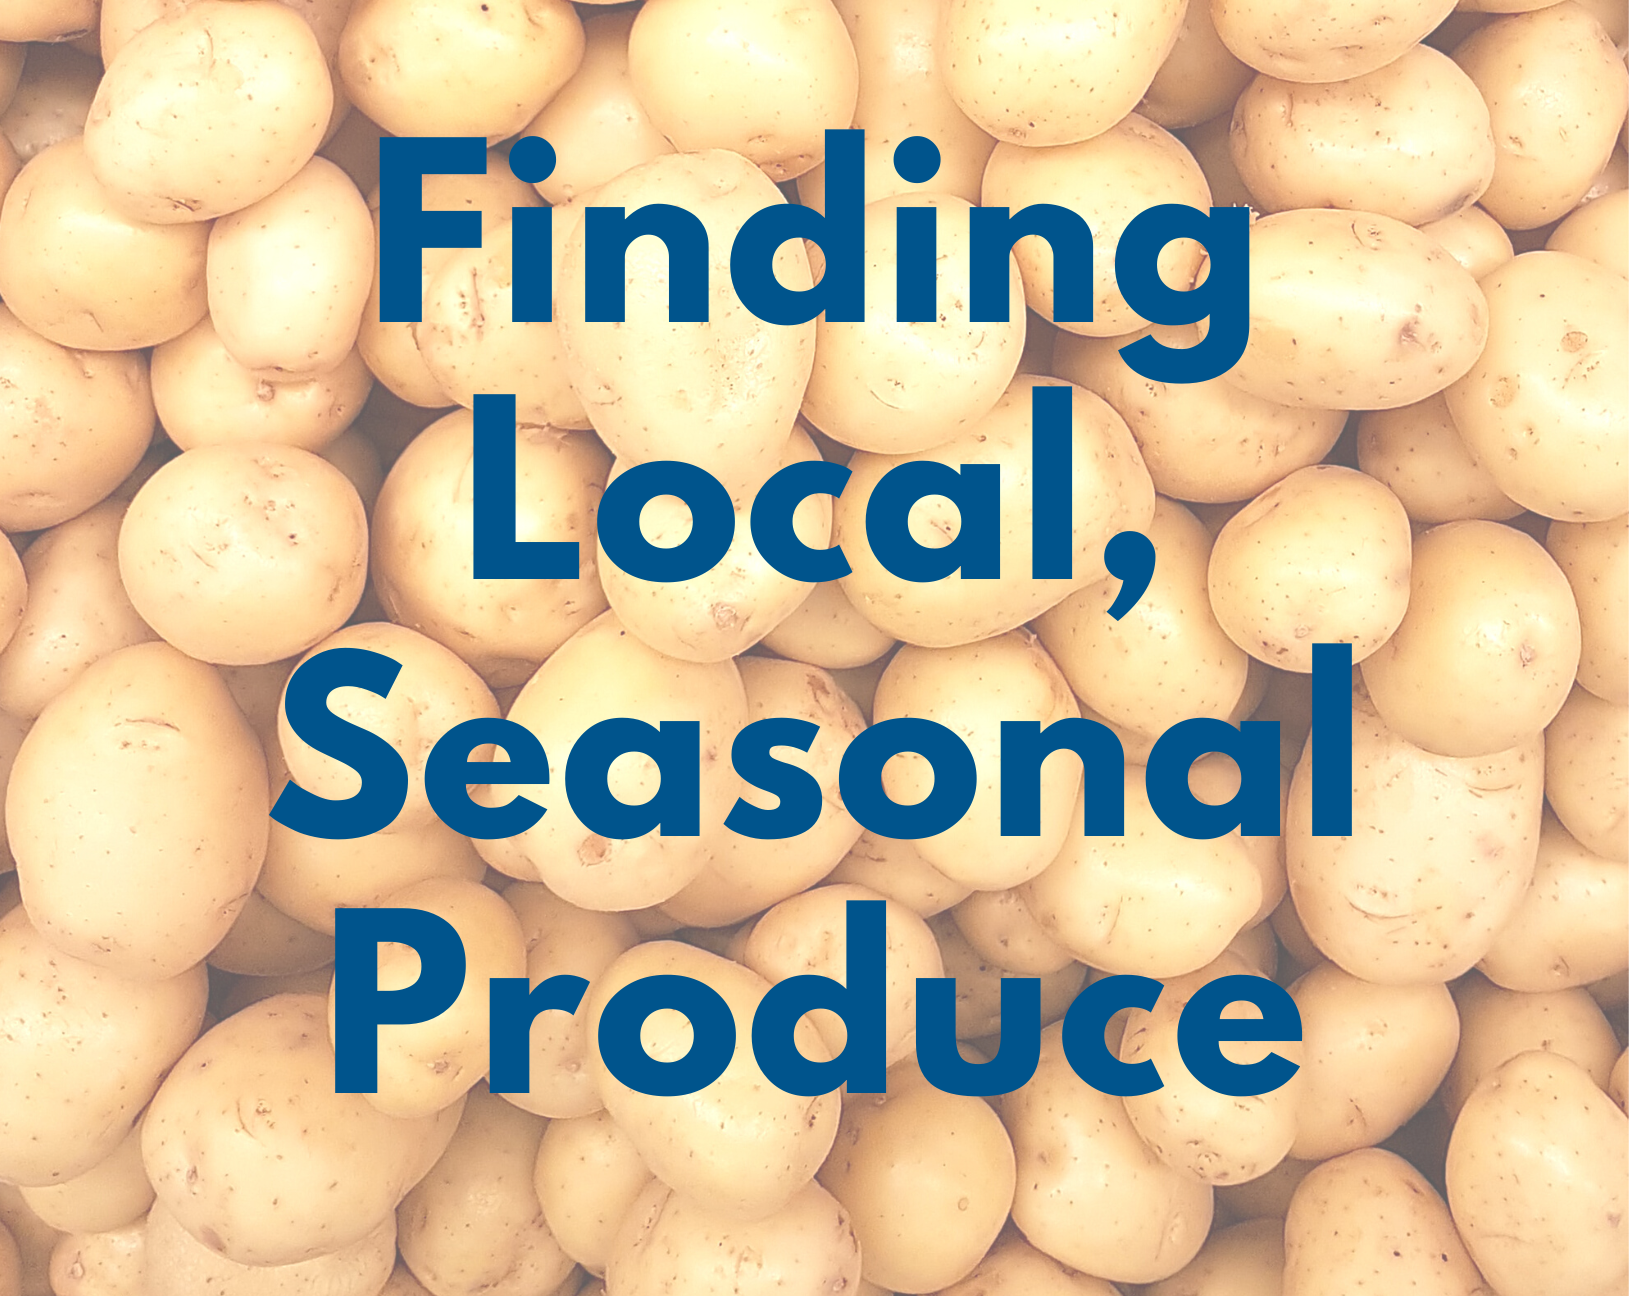 Finding Local, Seasonal Produce for your Family